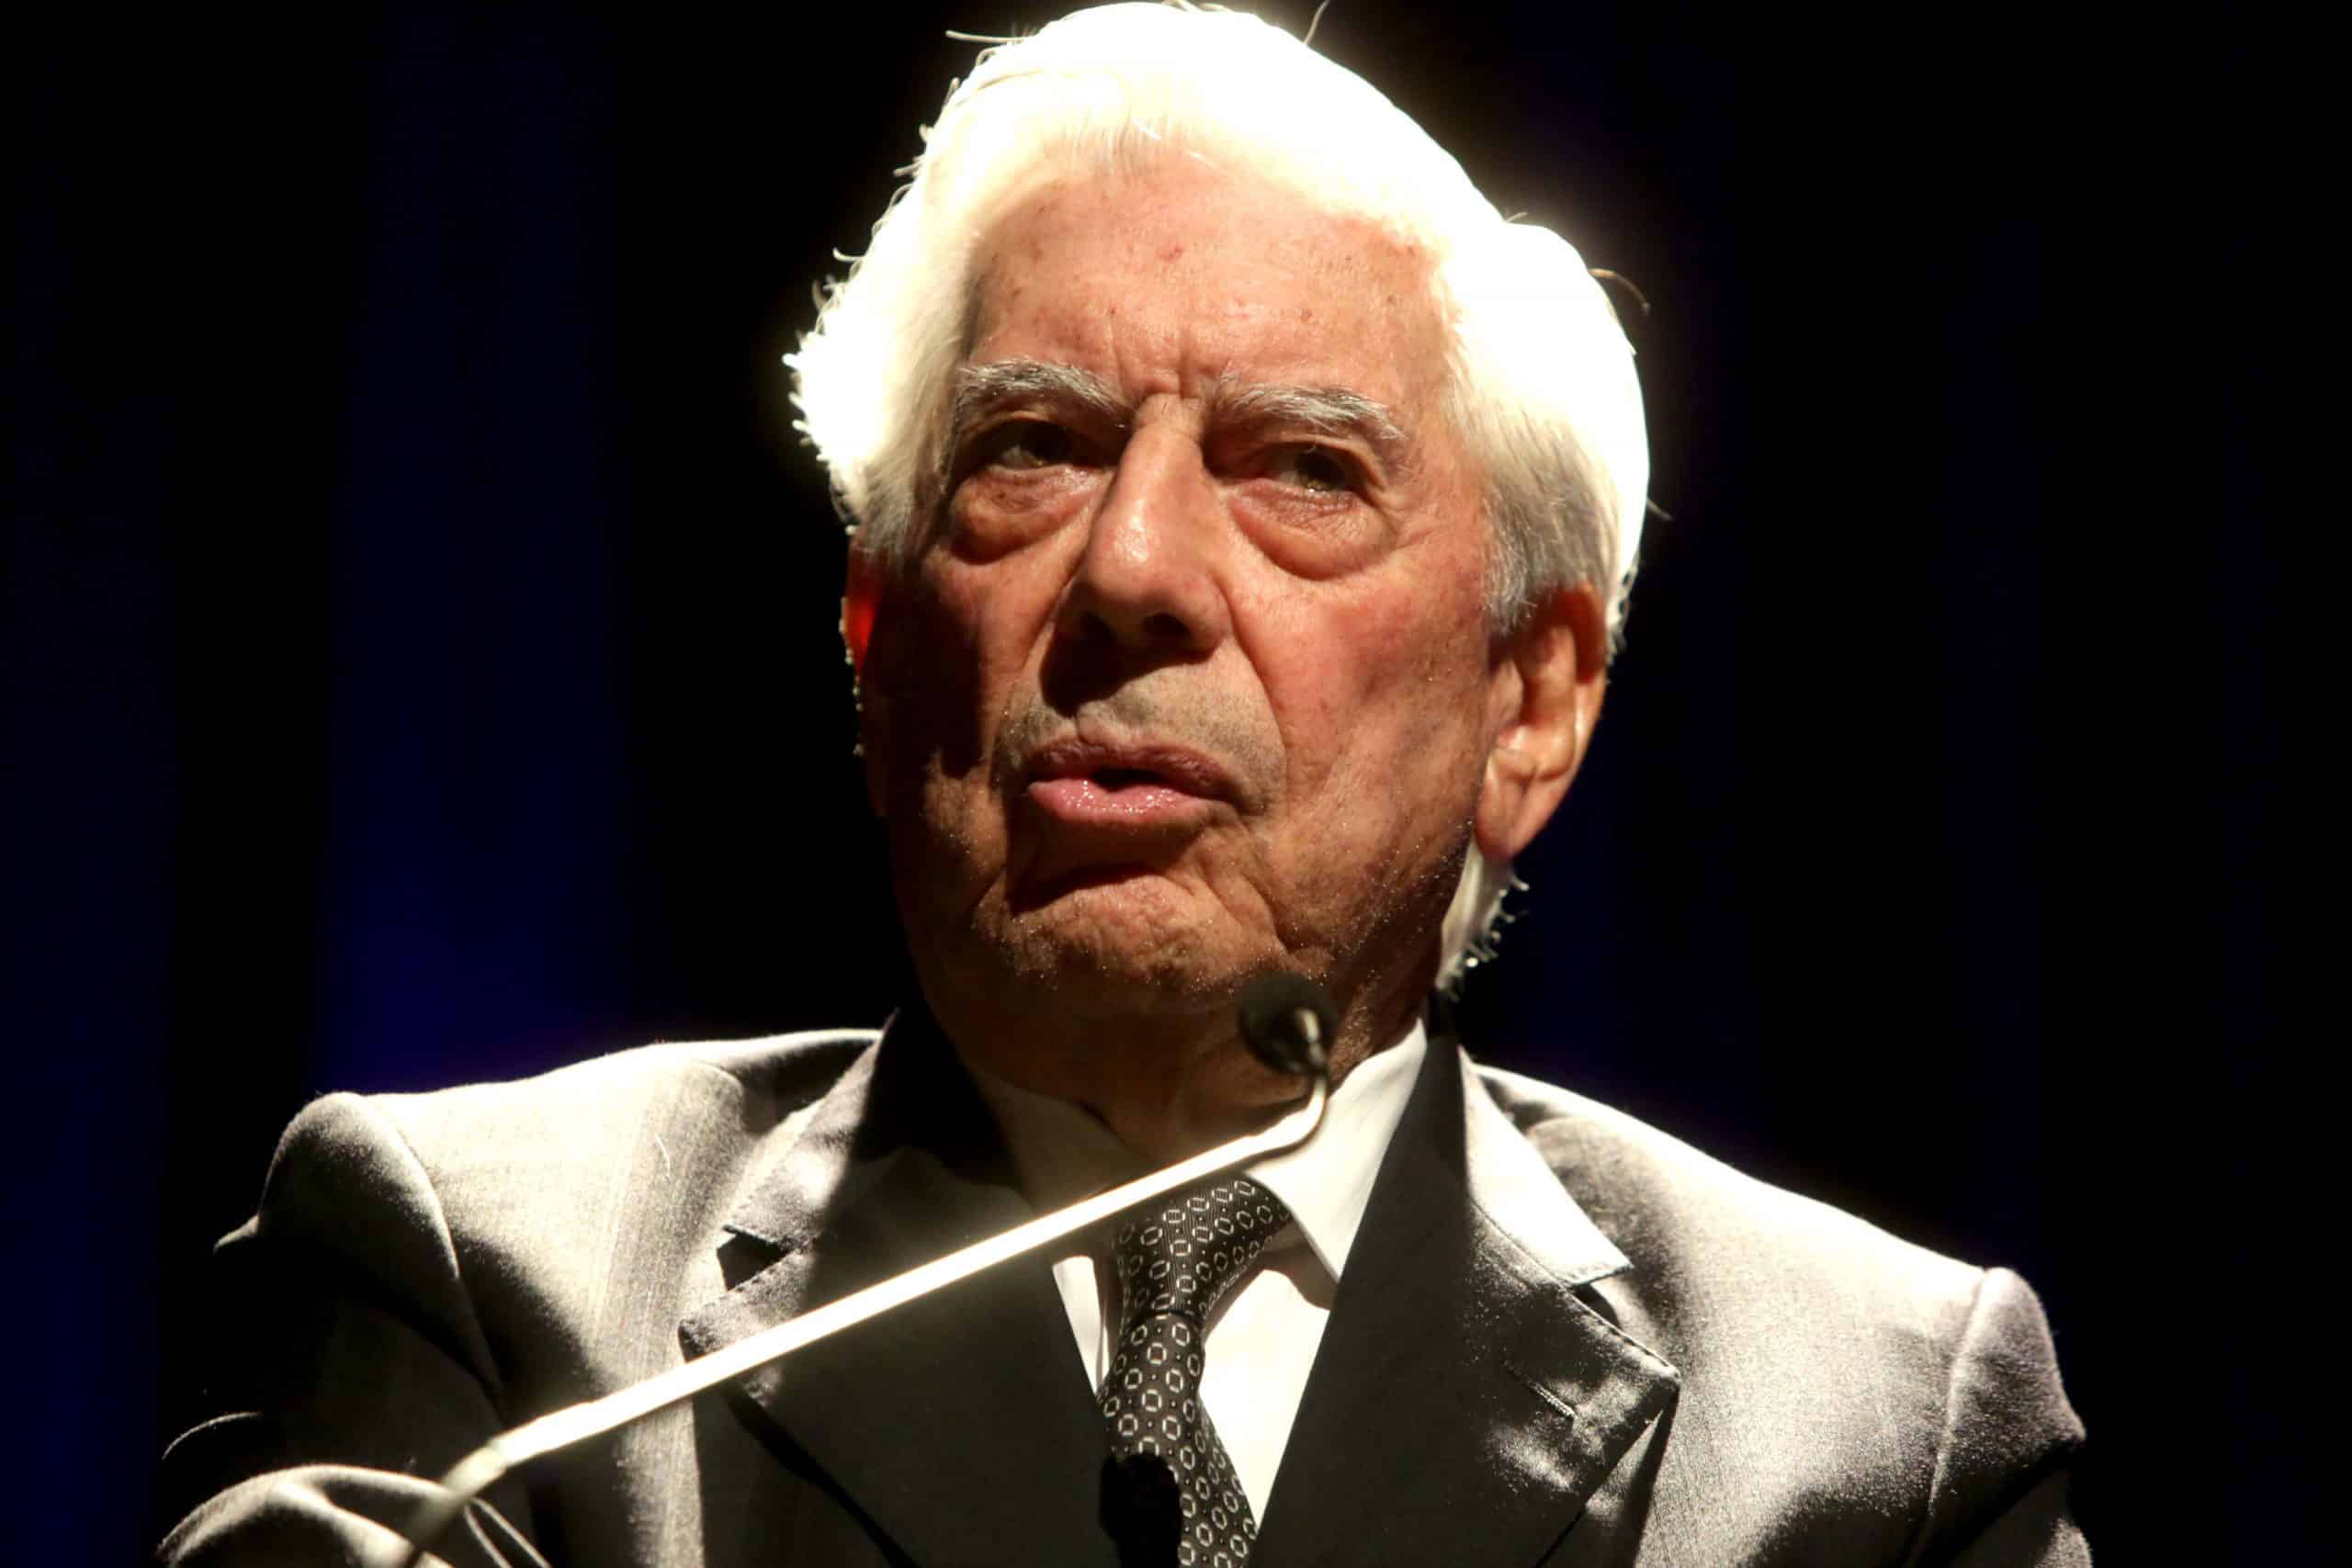 Mario Vargas Llosa in 2016 (Fronteiras do Pensamento/Greg Salibian/Wikimedia Commons/CC Attribution-Share Alike 2.0 Generic license: https://creativecommons.org/licenses/by-sa/2.0/deed.en)